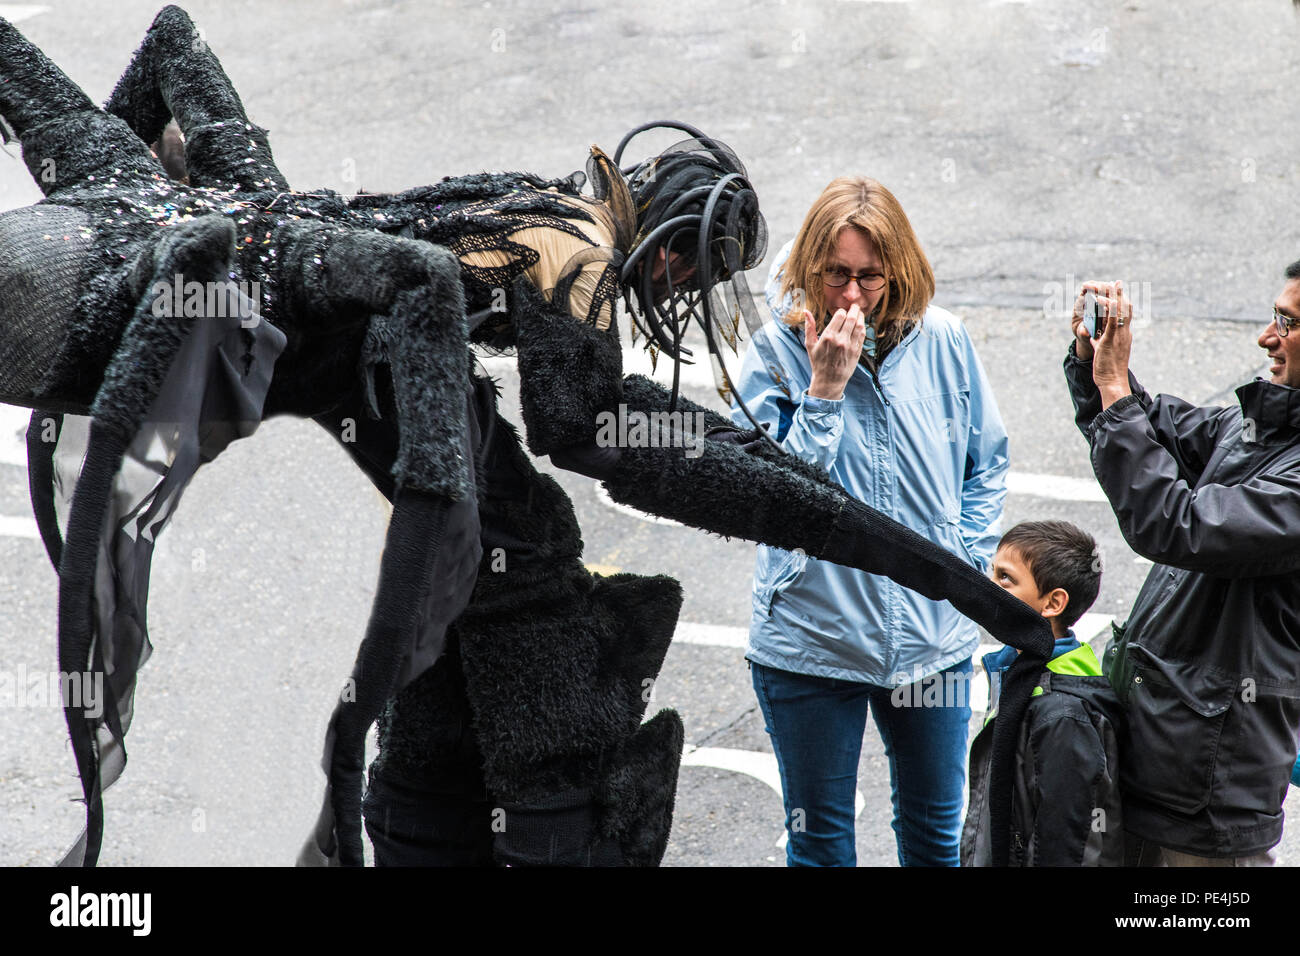 Giant black spider greeting little boy, man taking picture, woman, Strasbourg carnival parade, Alsace, France, Europe, Stock Photo